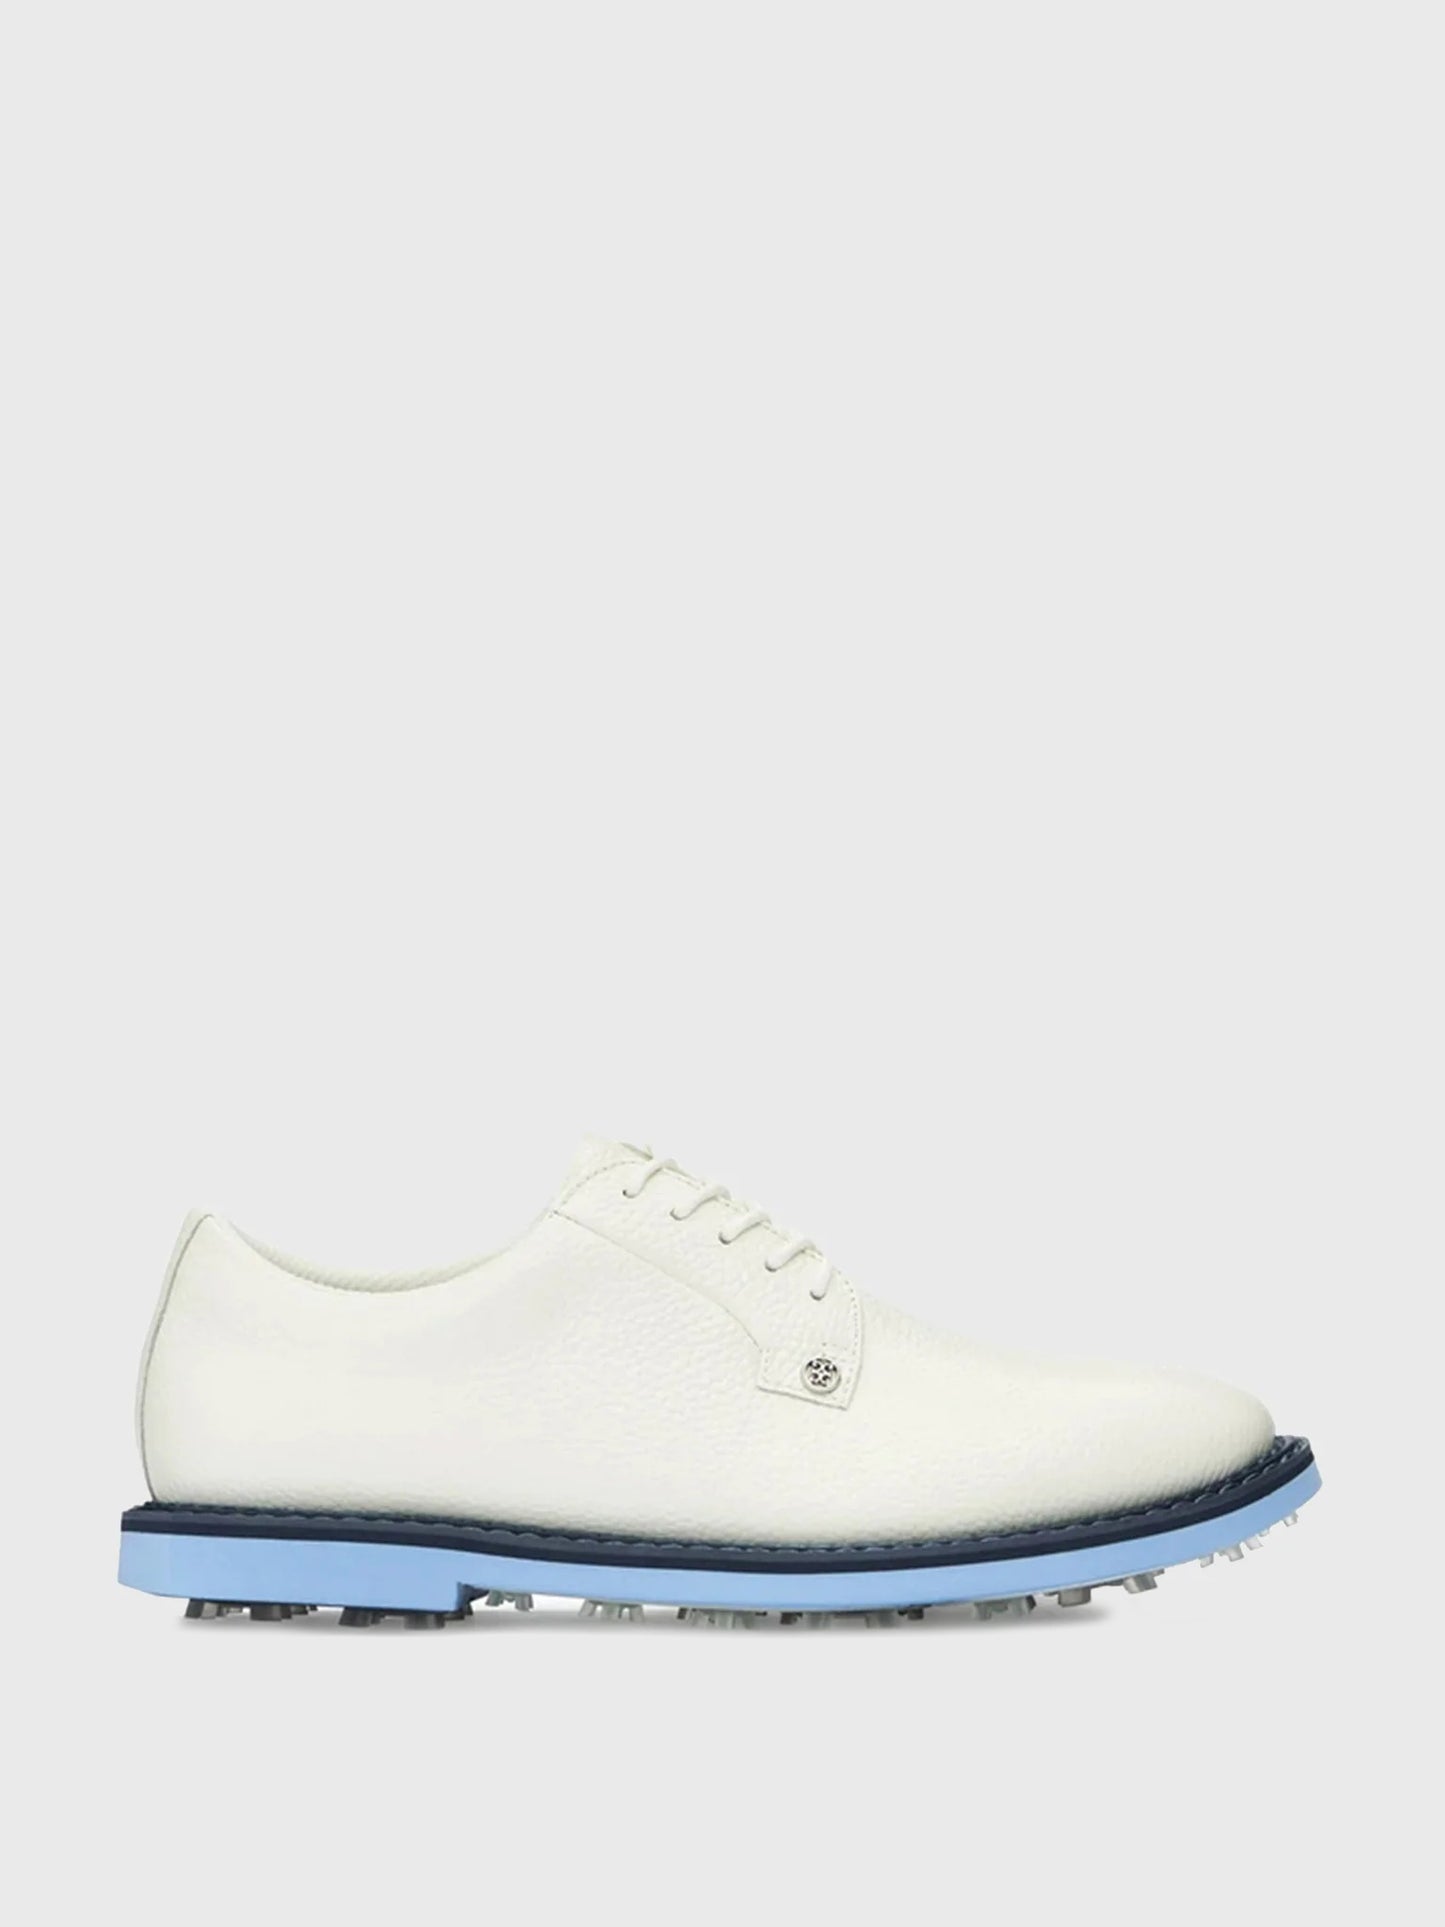 G/Fore Men's Collection Two Tone Gallivanter Golf Shoe